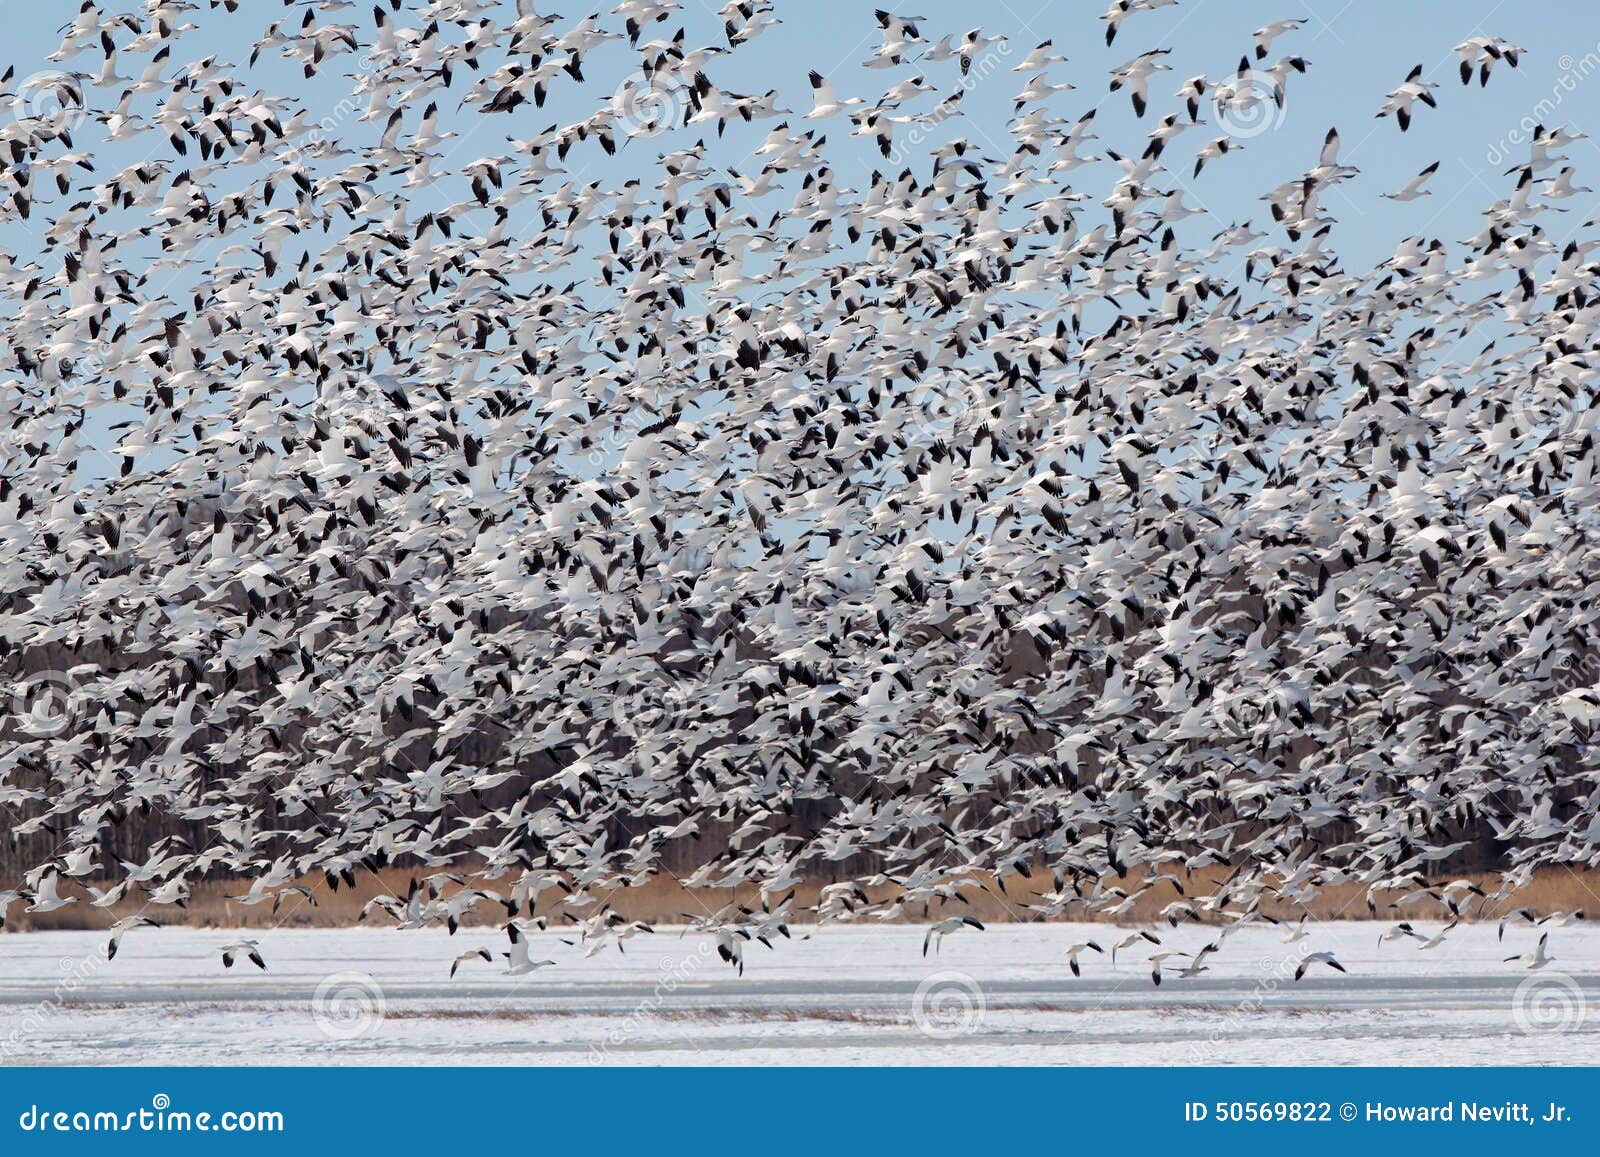 large flock of snow geese taking off.